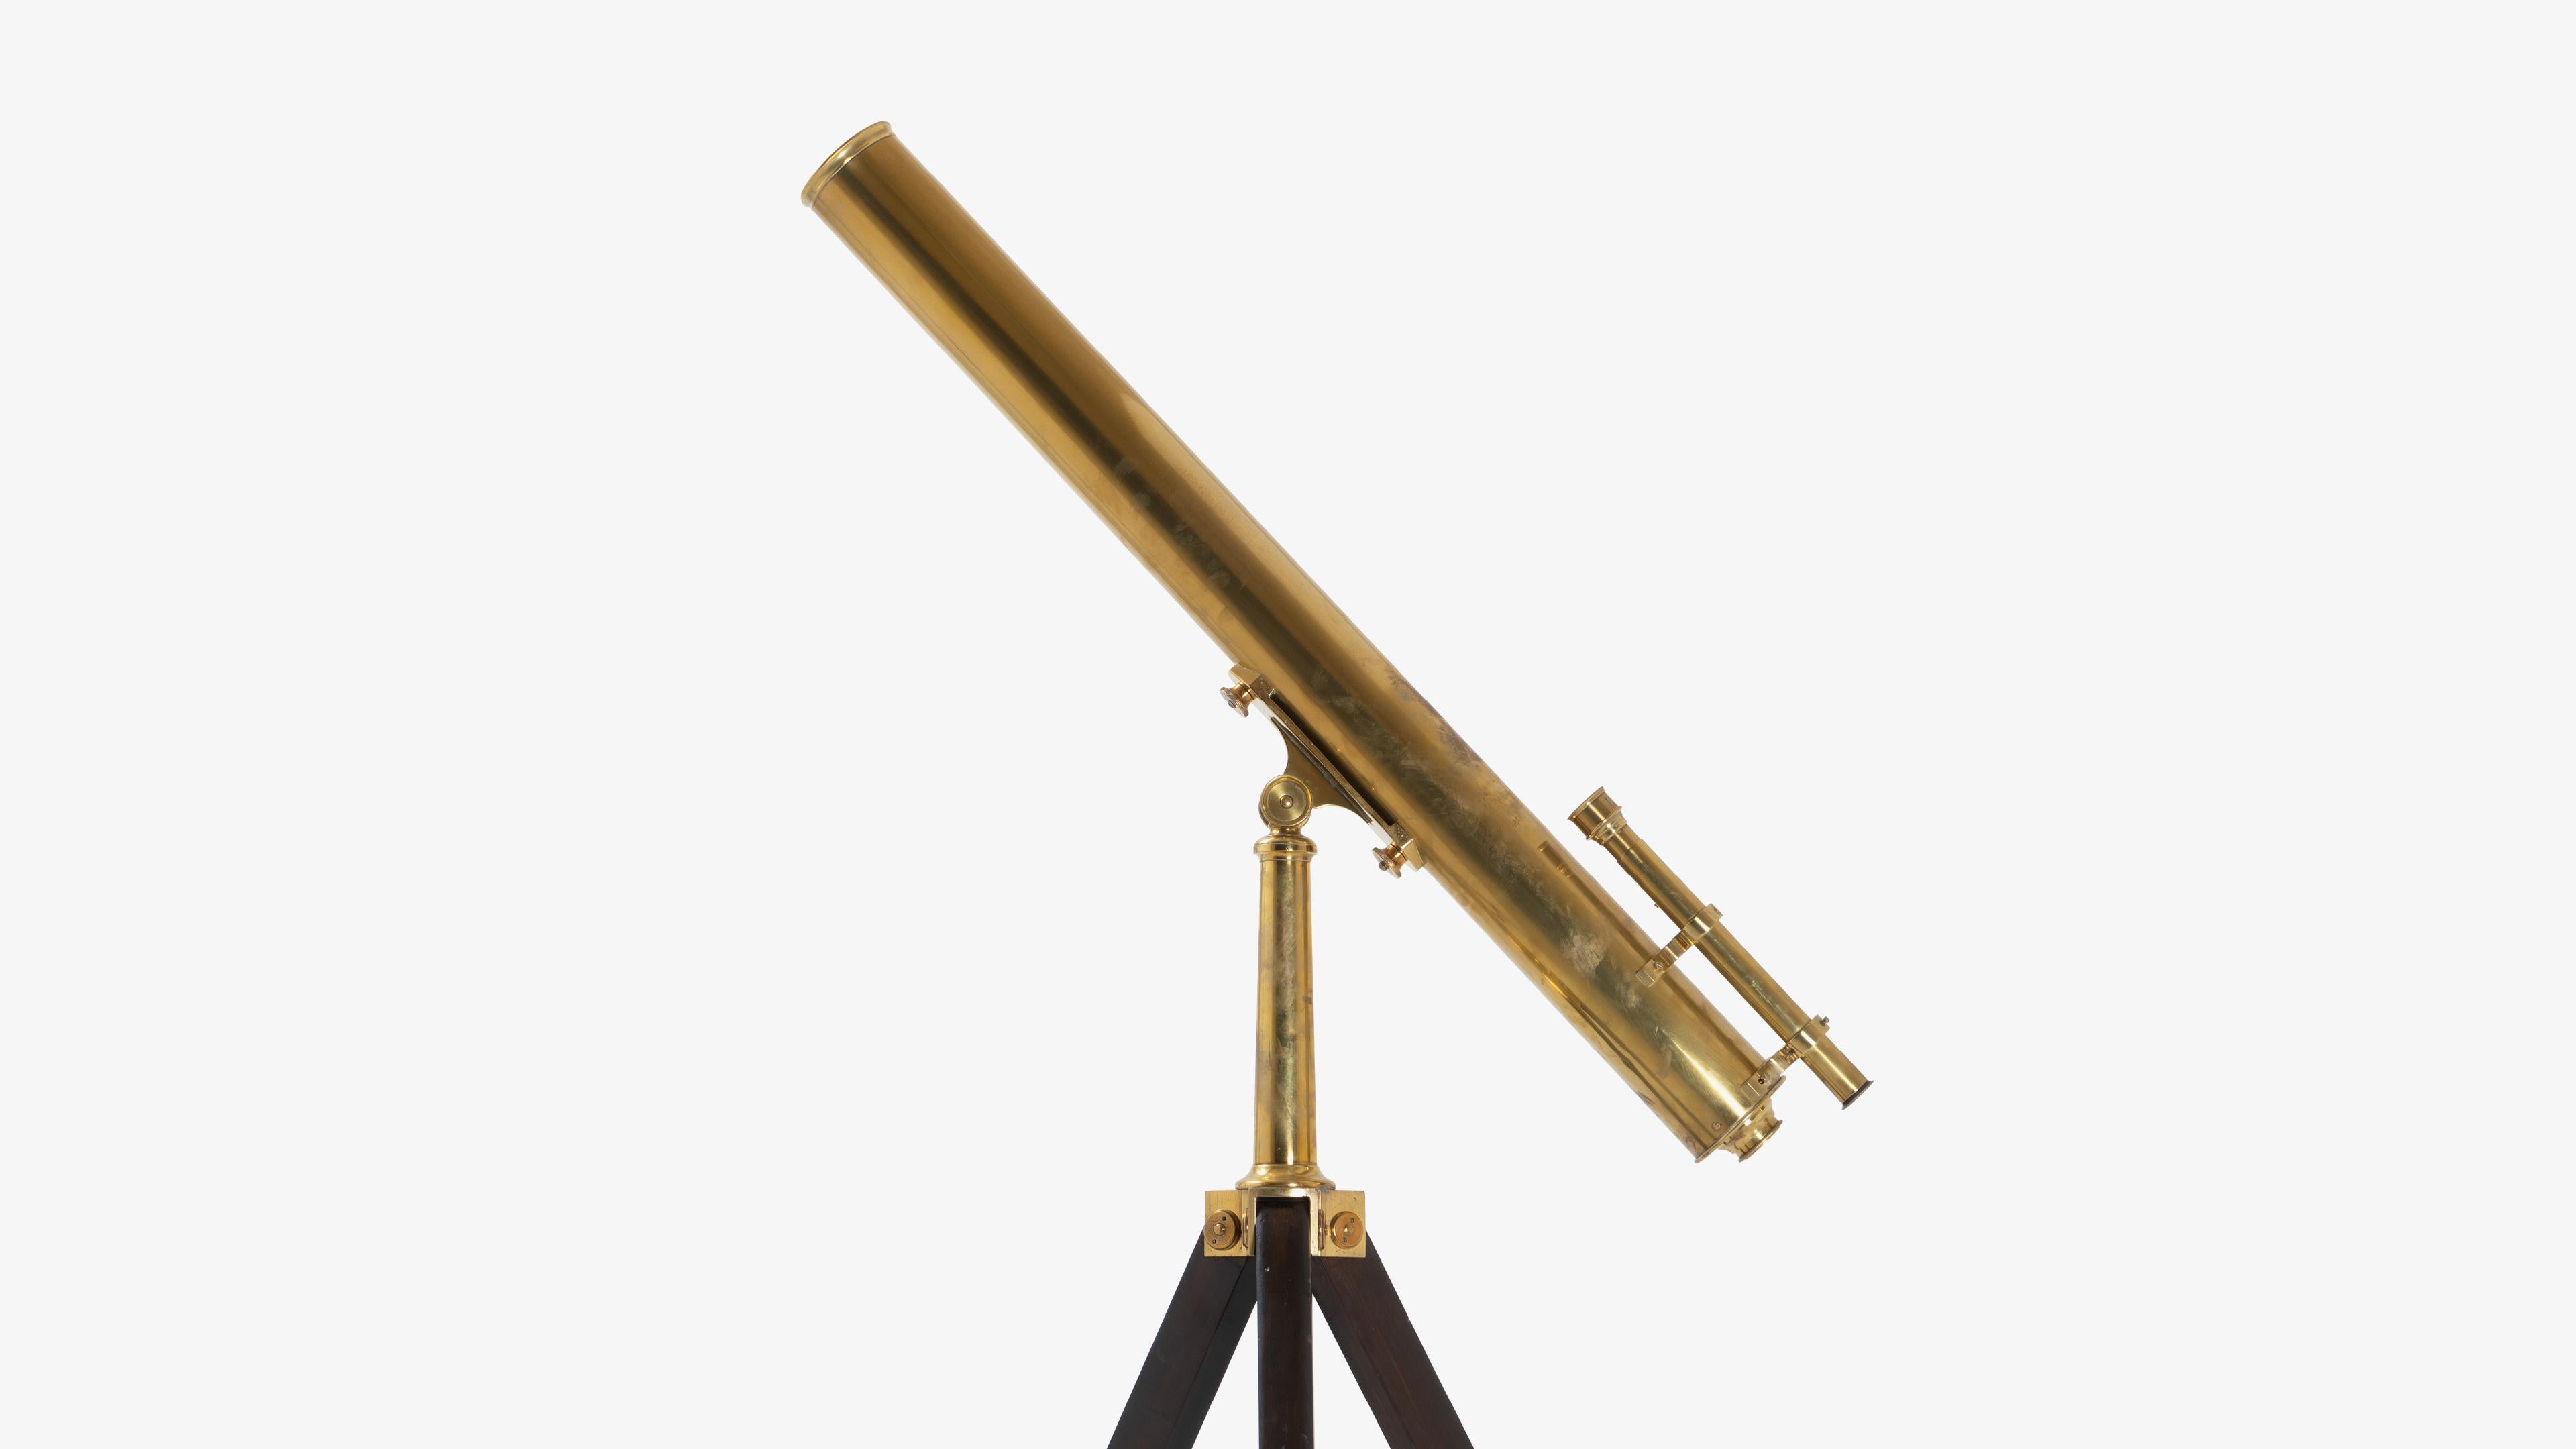 A handsome curiosity every refined home needs. This vintage telescope is an excellent example of early English telescope design, this piece by none other than Broadhurst Clarkson & Co. The company itself has a long history of partnerships and name